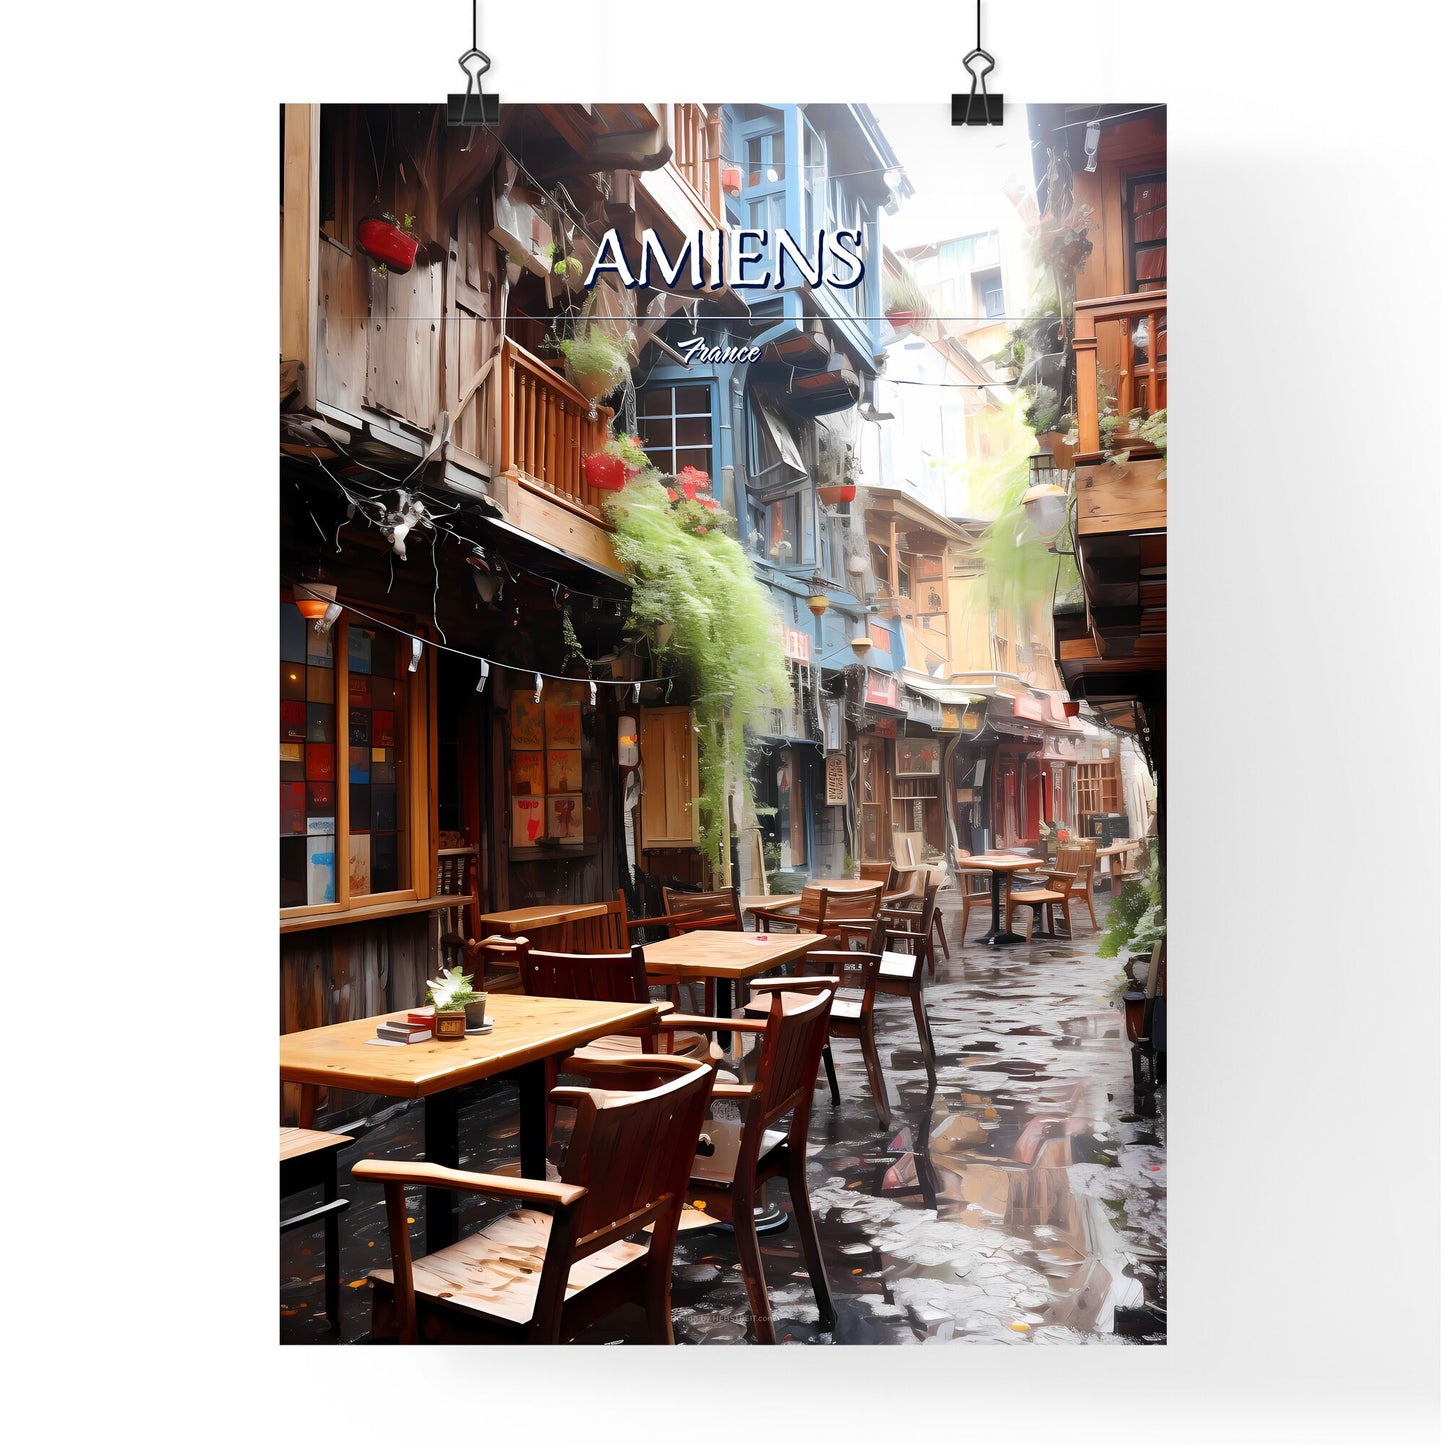 Amiens, France - Art print of a street with tables and chairs in a rainy day Default Title